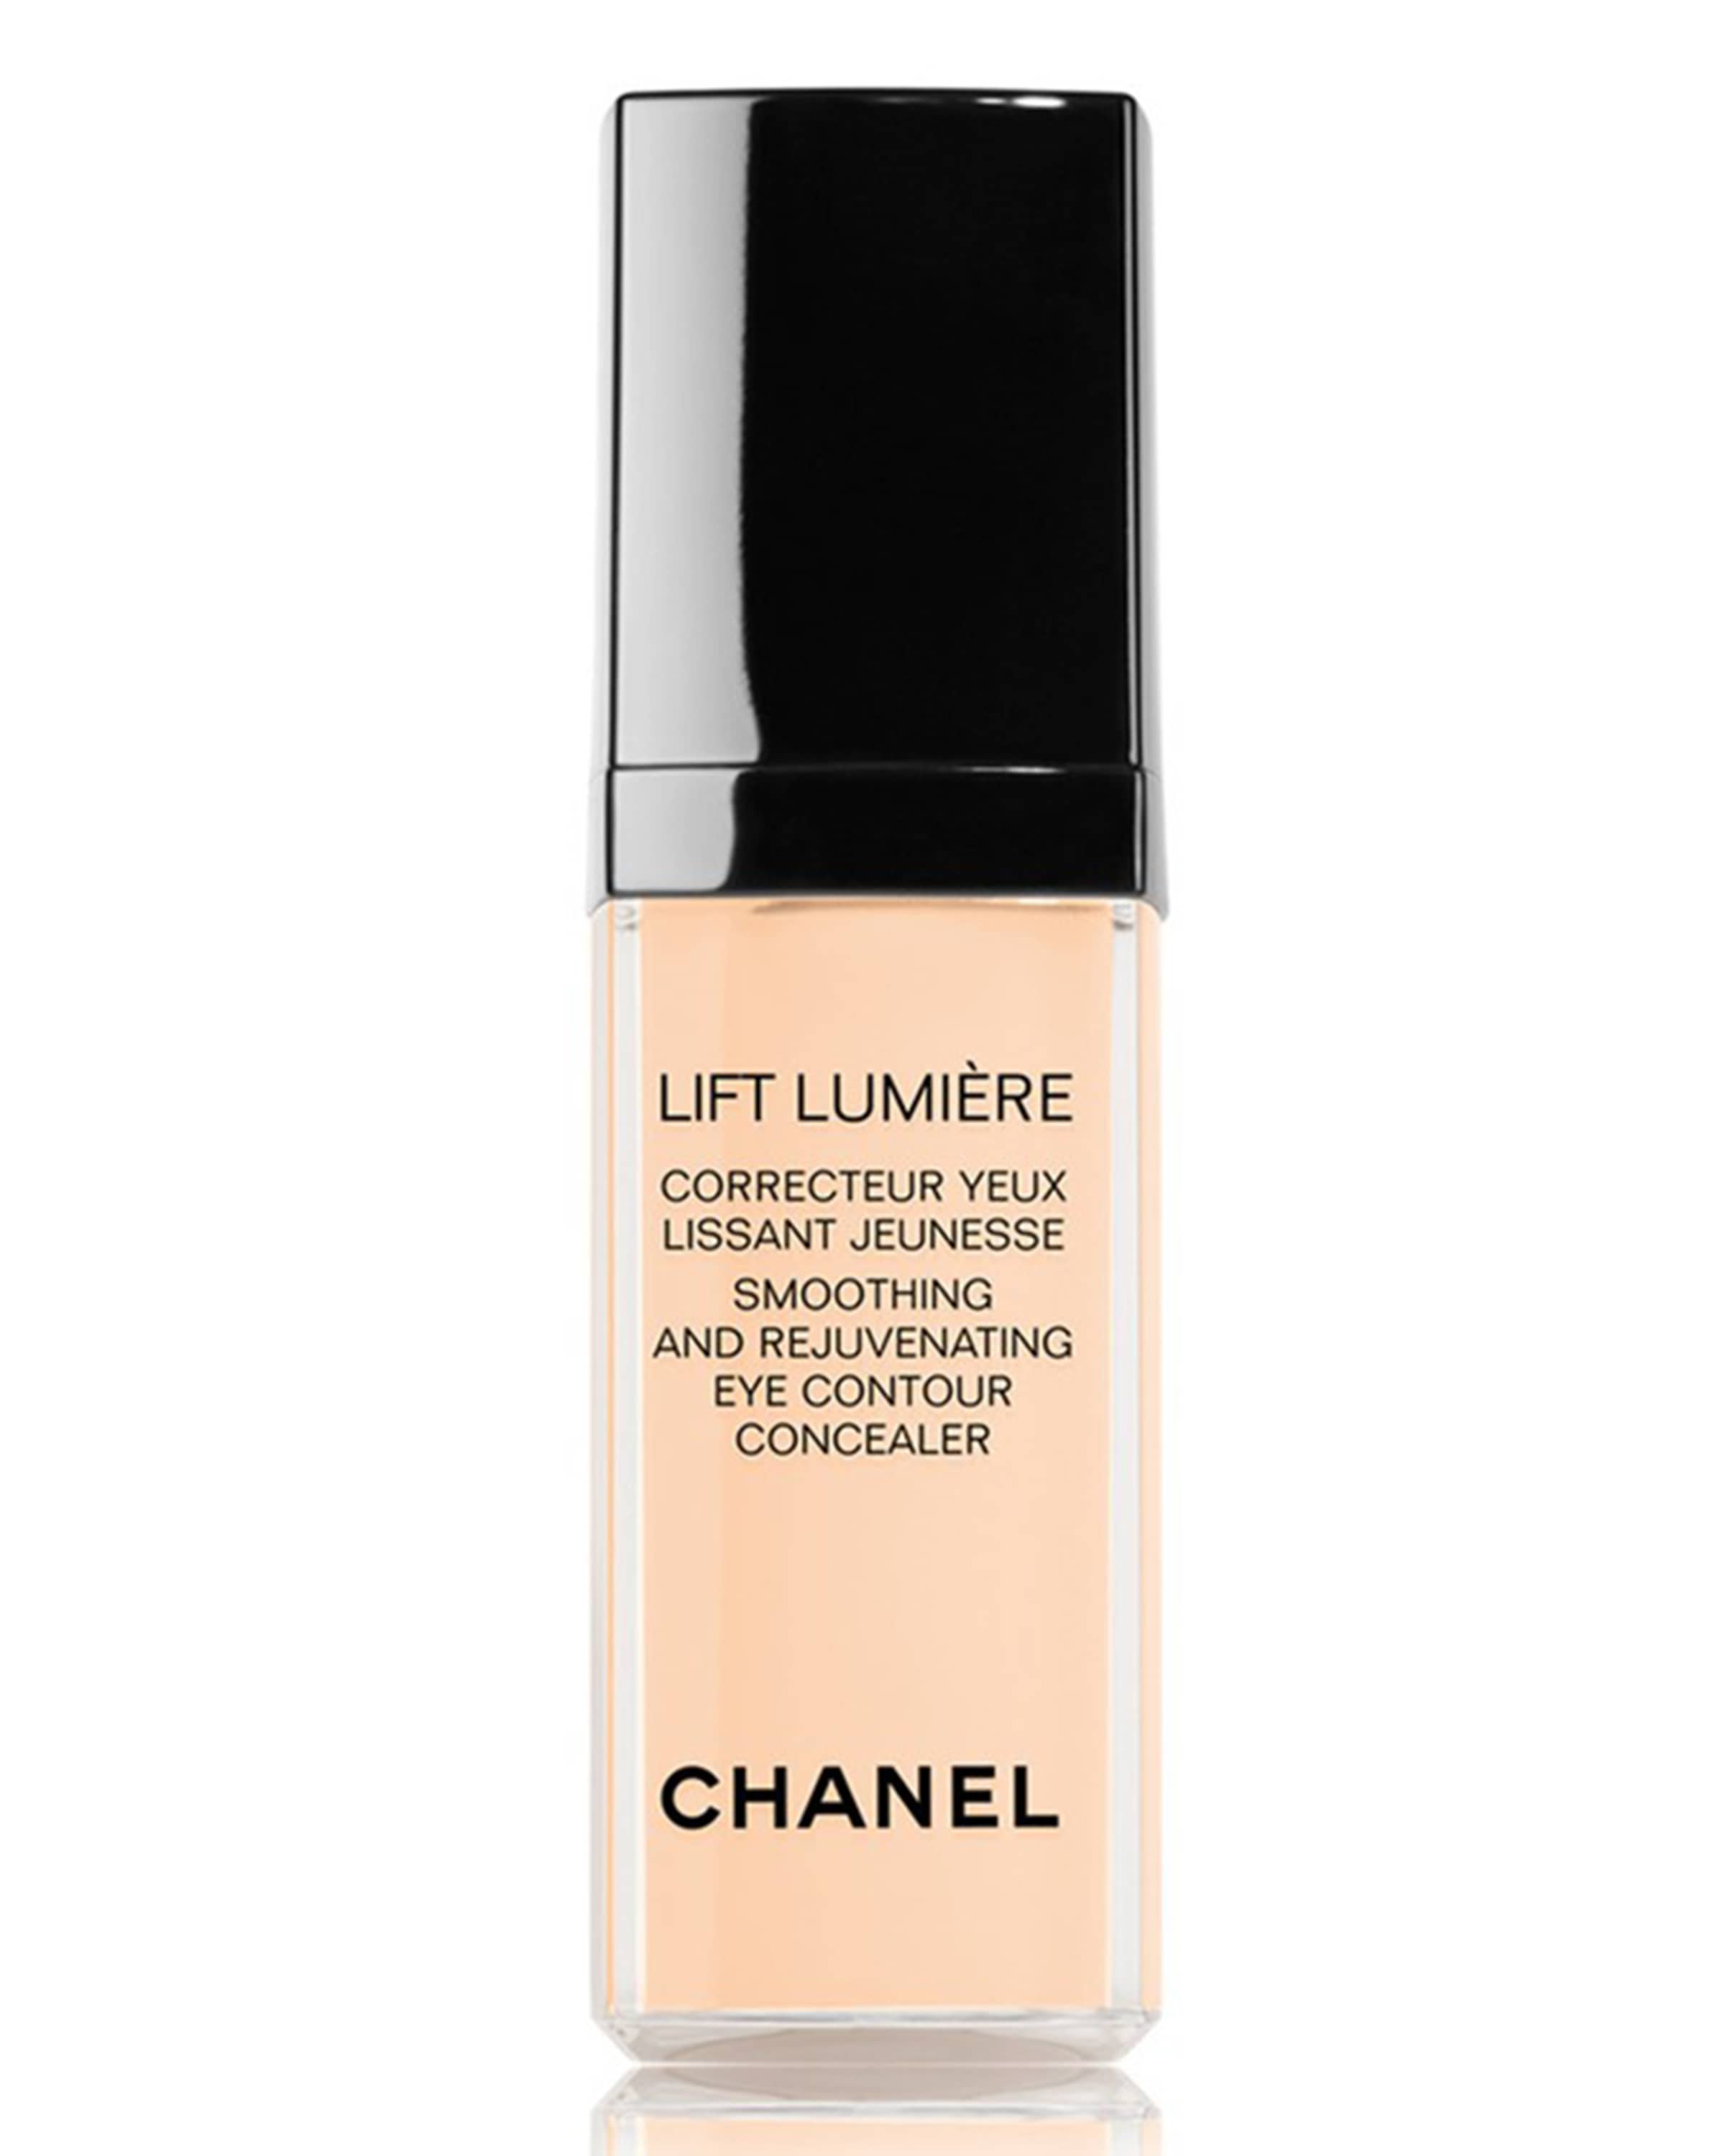 CHANEL LIFT LUMIÈRE Smoothing And Rejuvenating Eye Contour Concealer |  Neiman Marcus